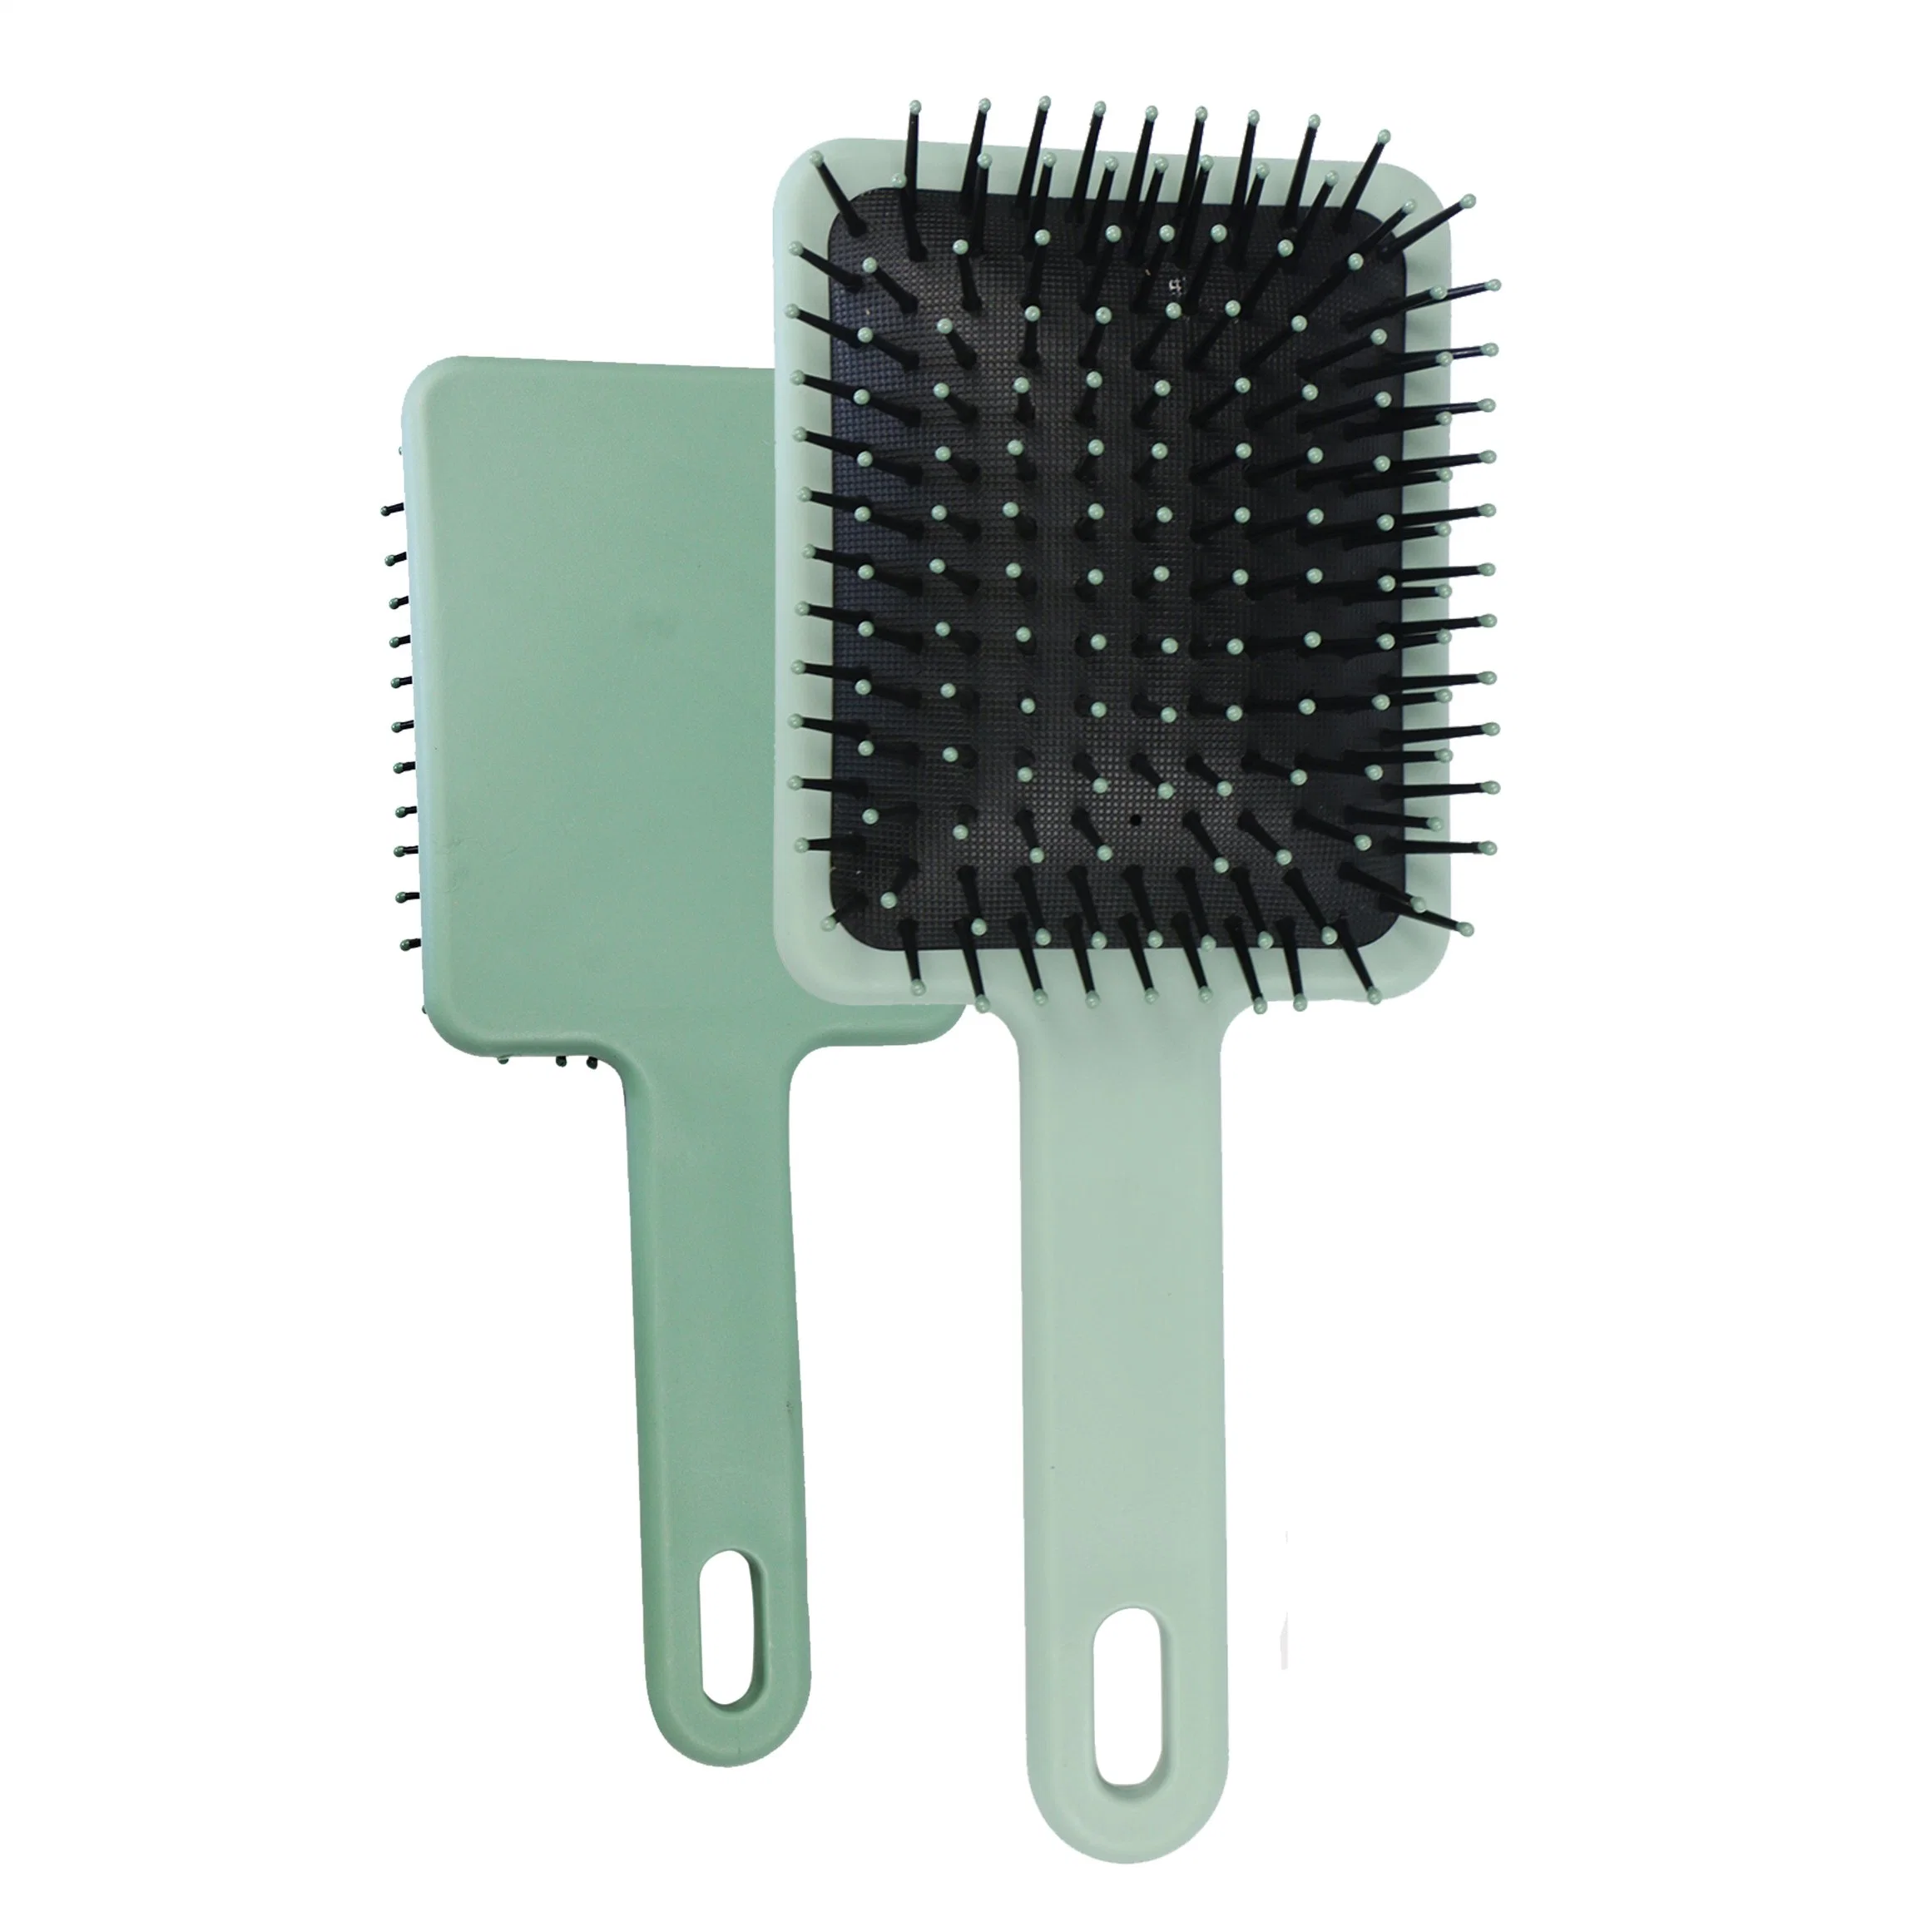 Square-Shaped Pocket Size Cushion Hair Brush Detangling & Massage Comb Hair Styling and Hair Care Tool for Women